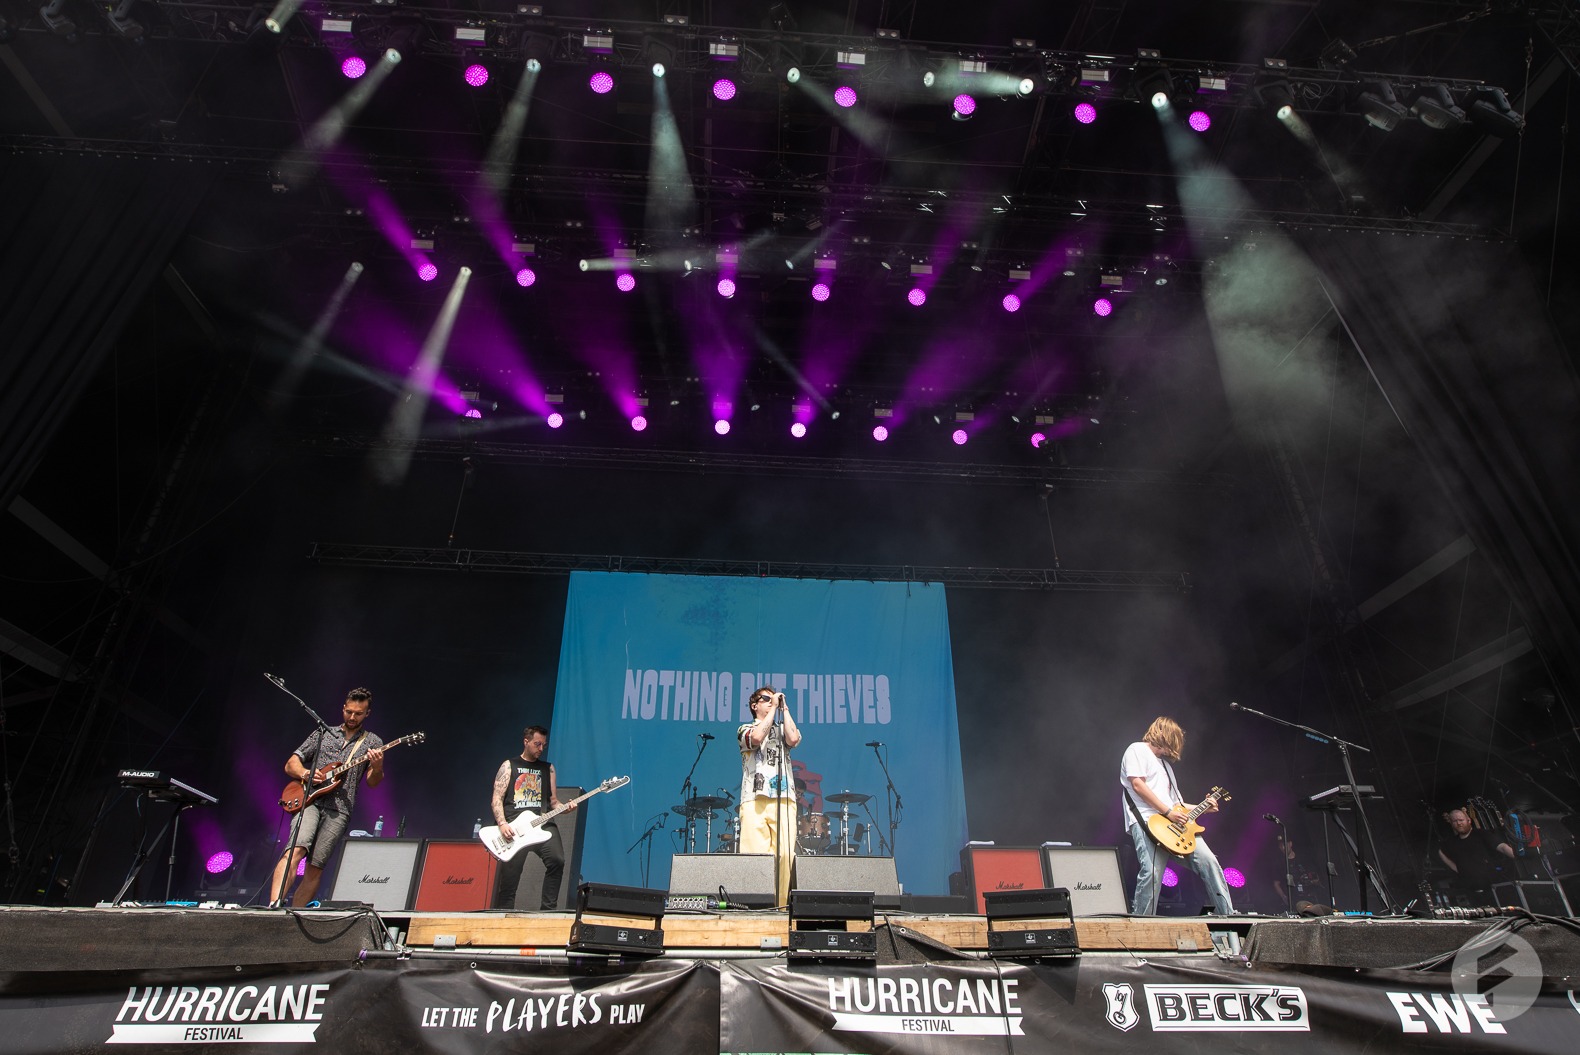 Nothing But Thieves | Hurricane Festival 2022